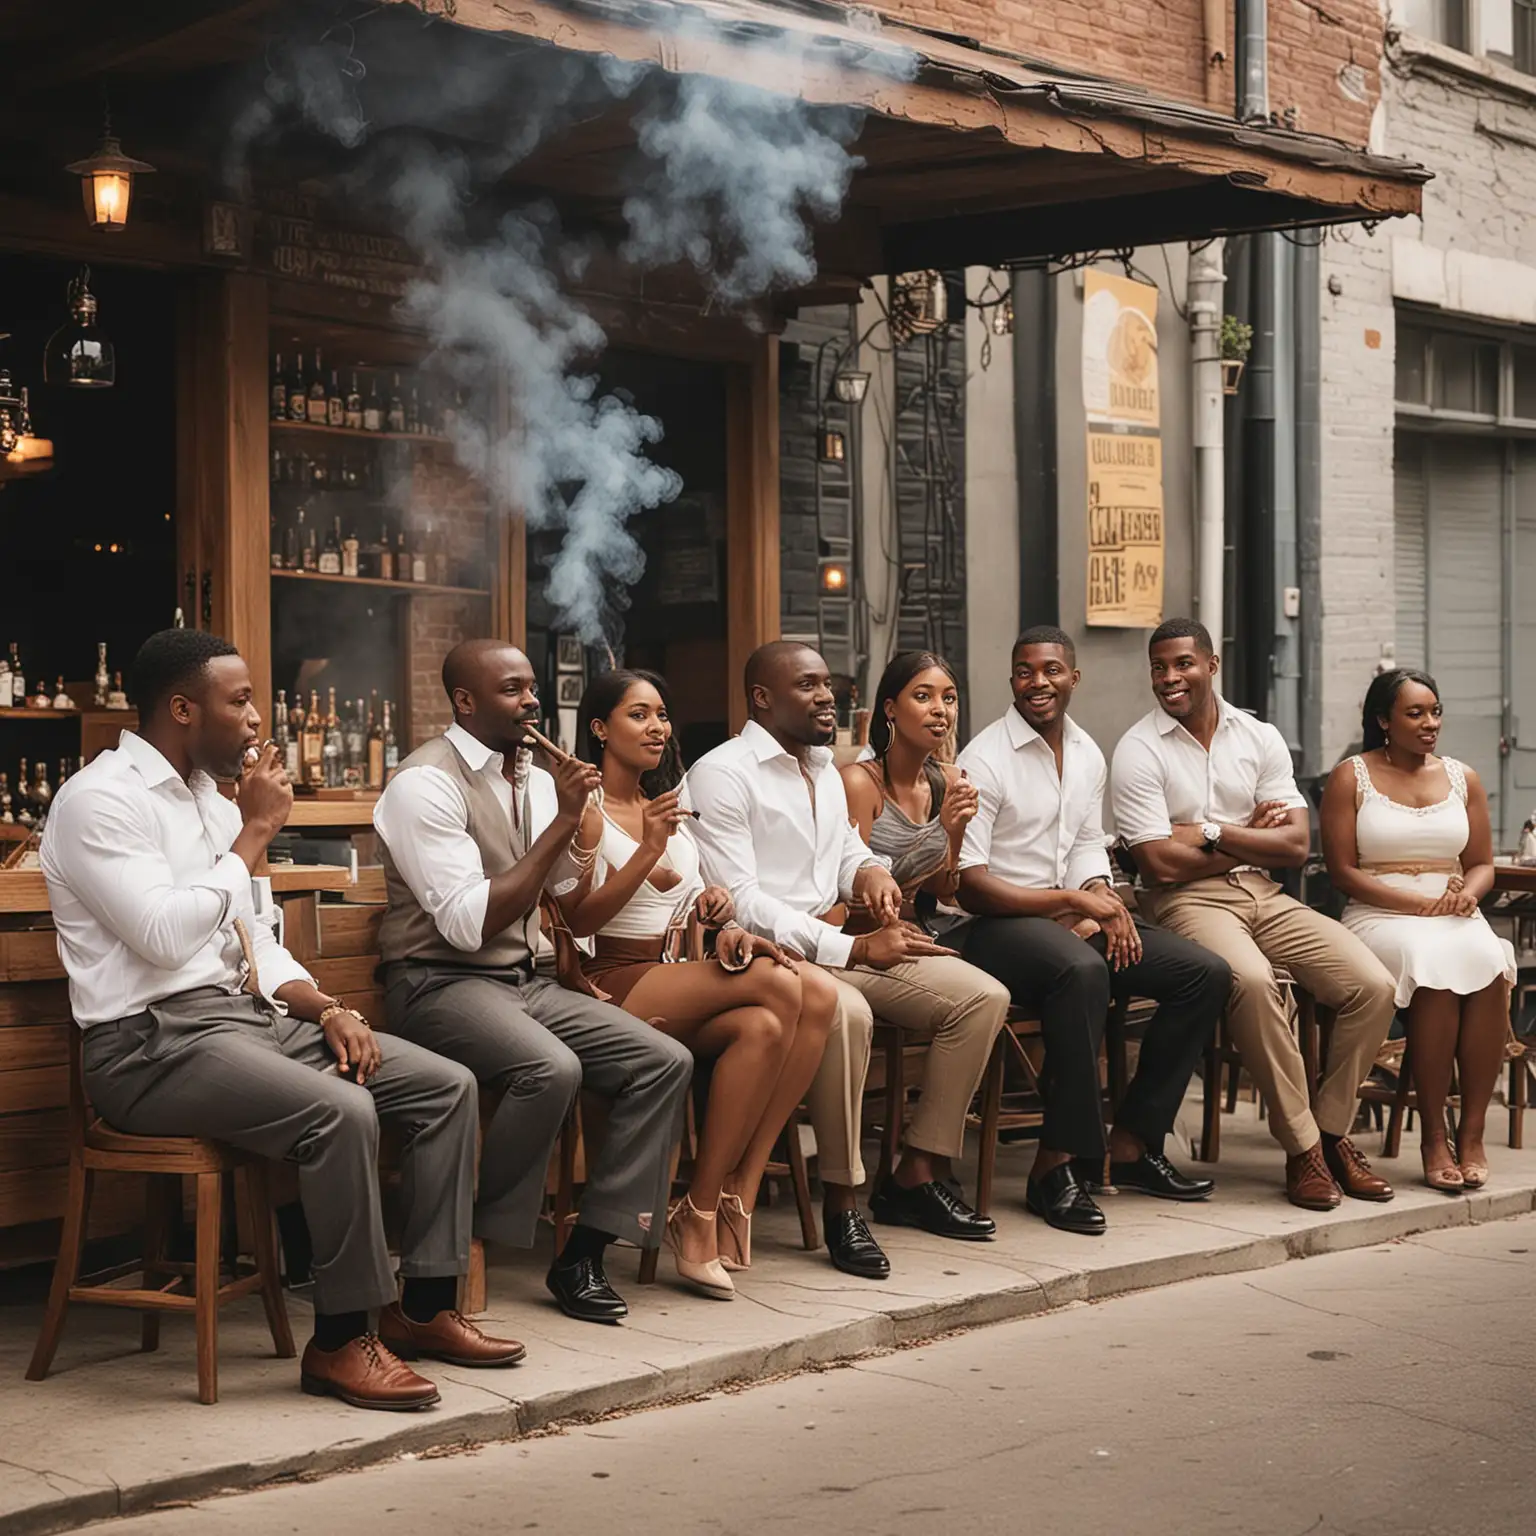 Create image for exterior cigar bar patio with black men and women standing black men and women sitting black men and women smoking cigars